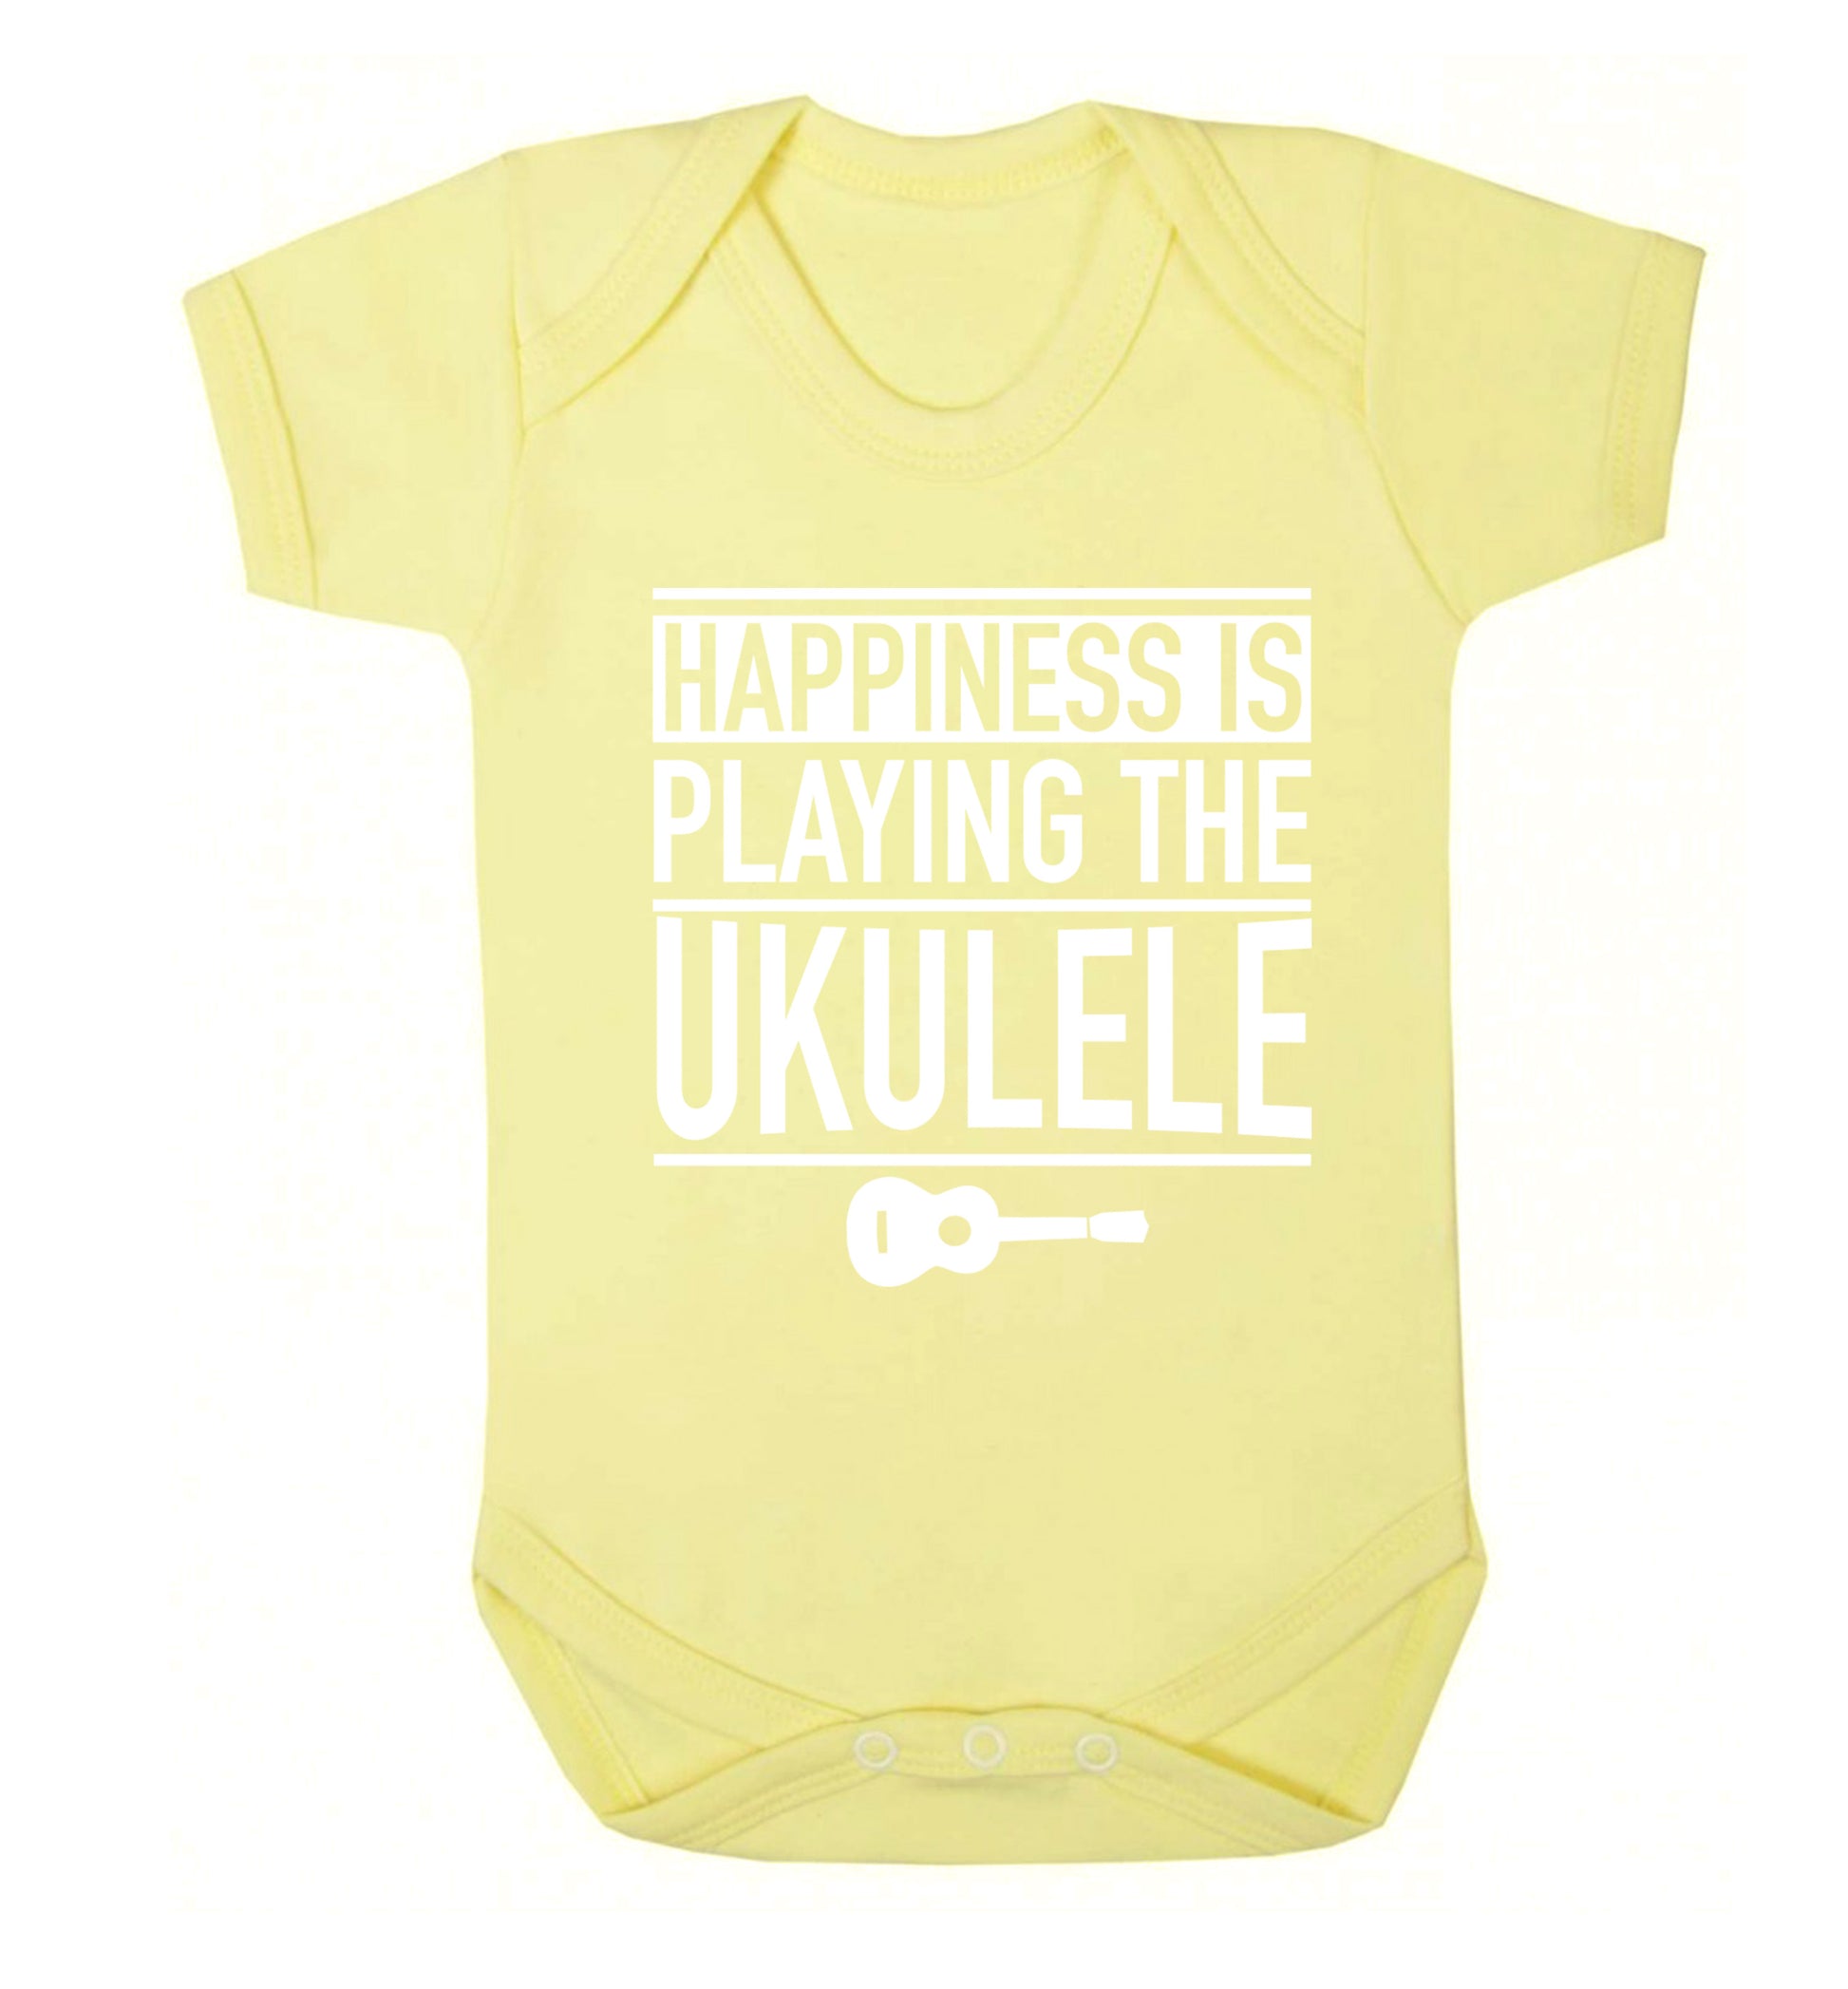 Happines is playing the ukulele Baby Vest pale yellow 18-24 months